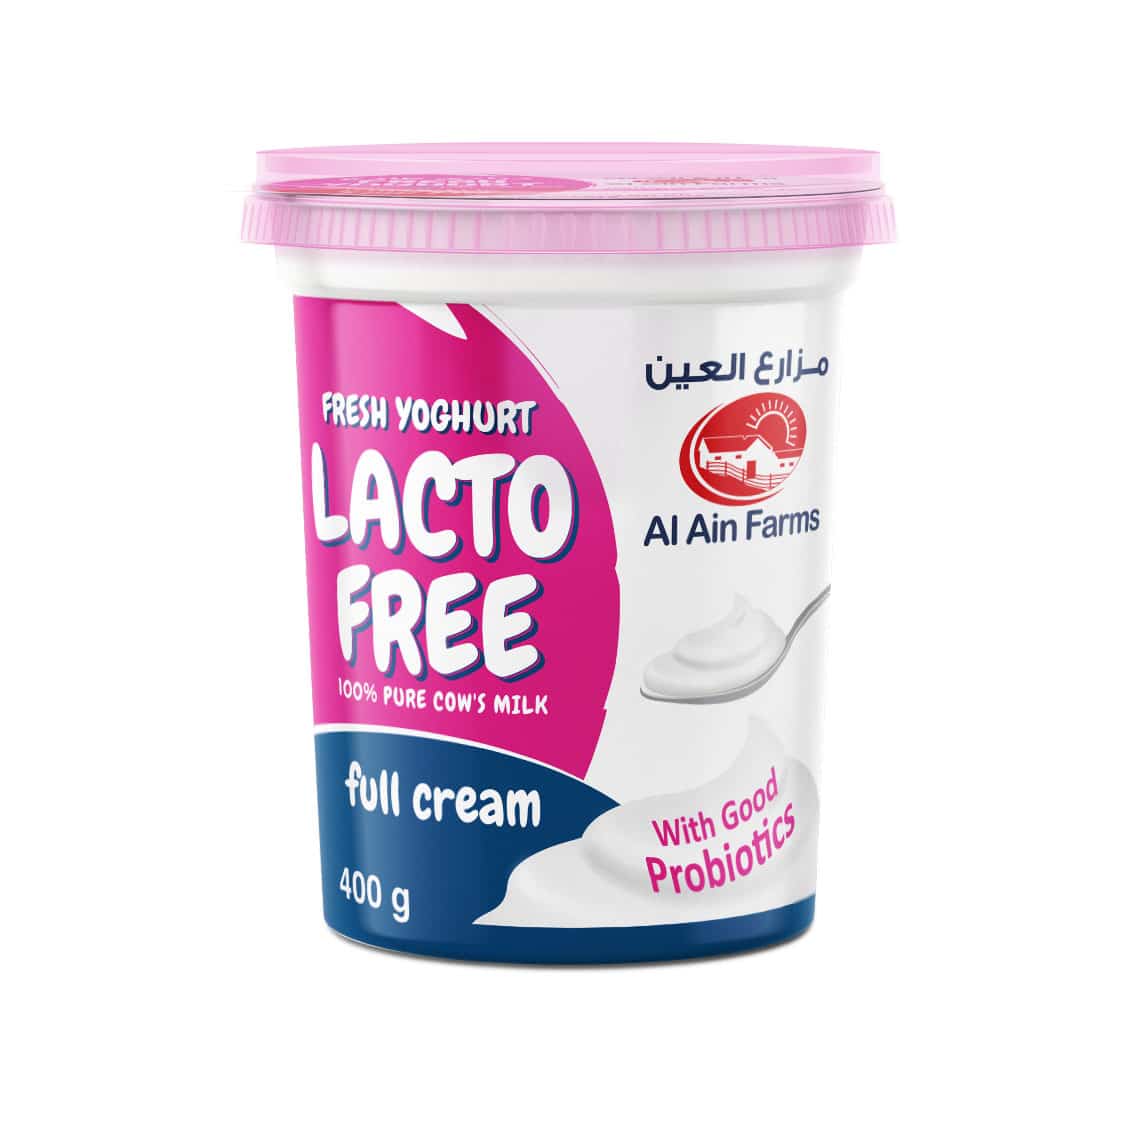 AL AIN FARMS LAUNCHES NEW LACTO FREE DAIRY PRODUCTS IN THE UAE - Hotel News